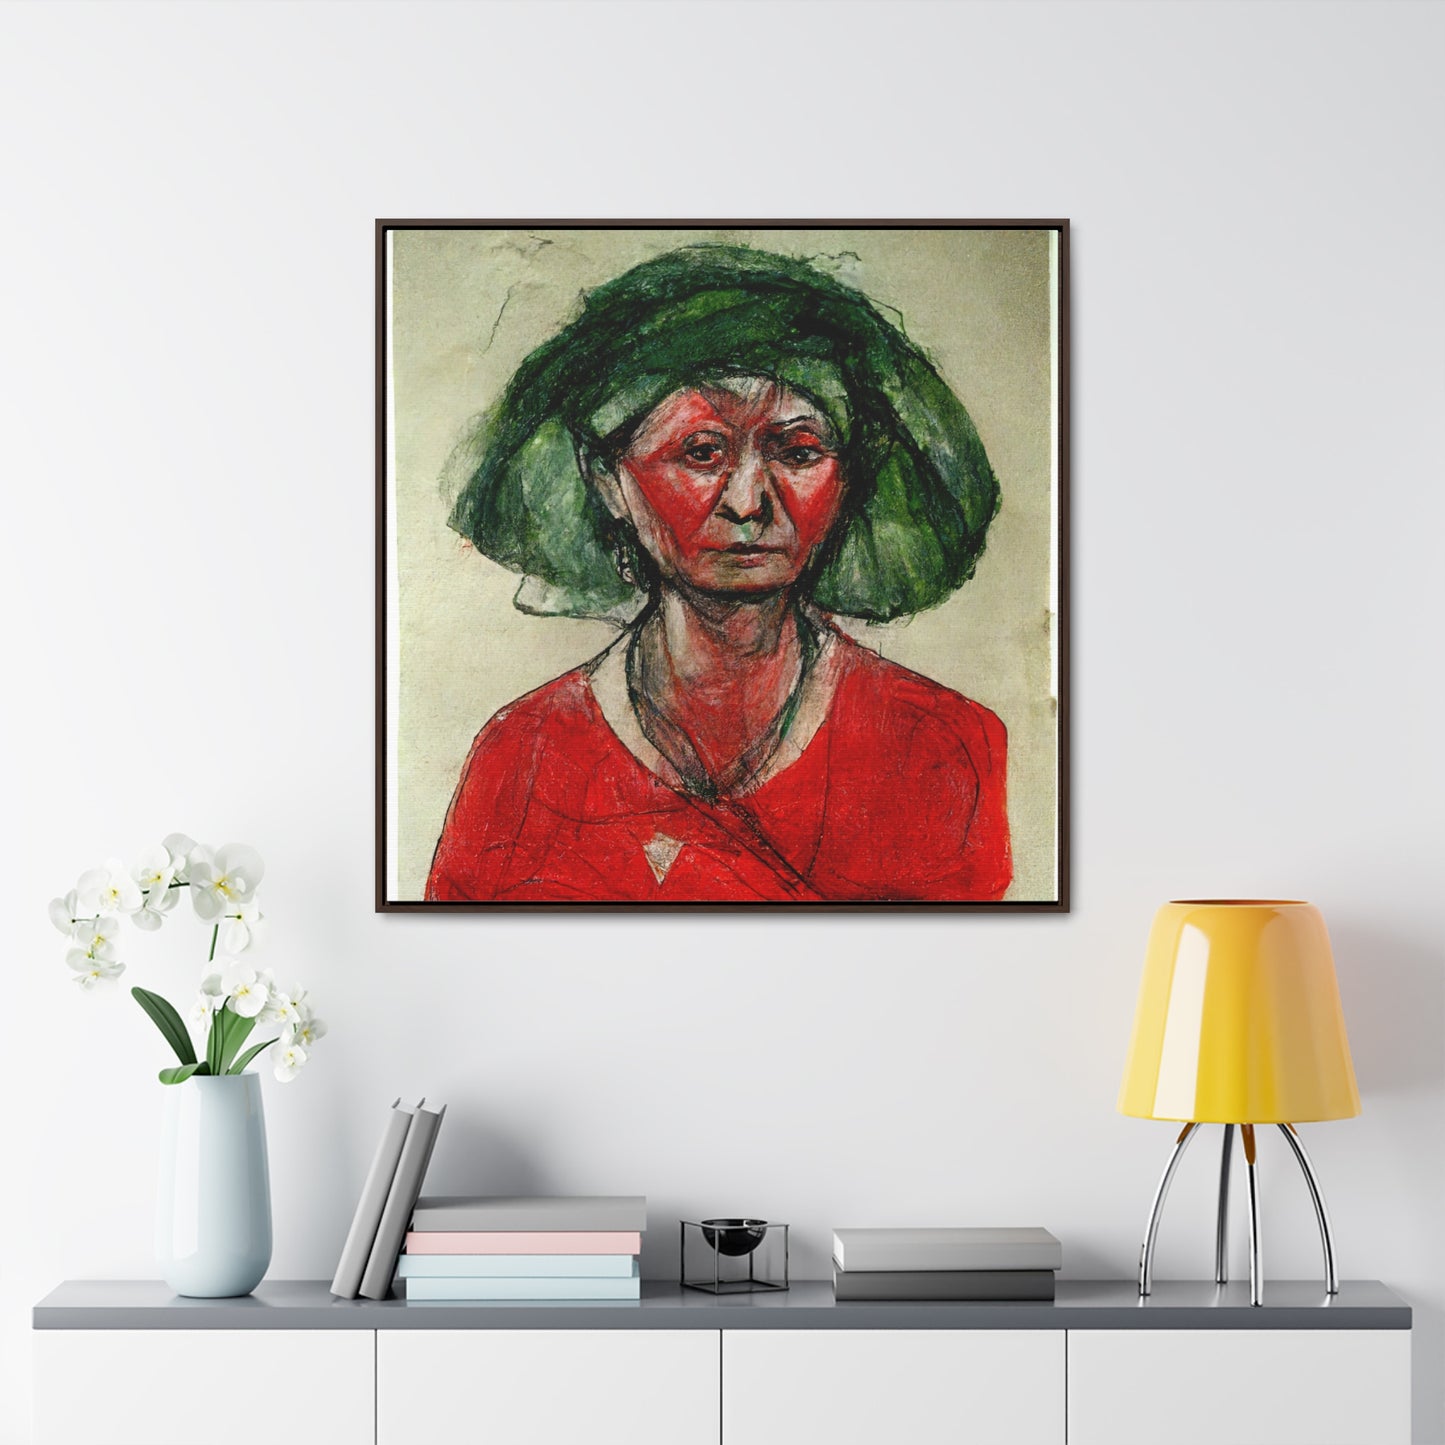 Loneliness Green Red 39, Valentinii, Gallery Canvas Wraps, Square Frame